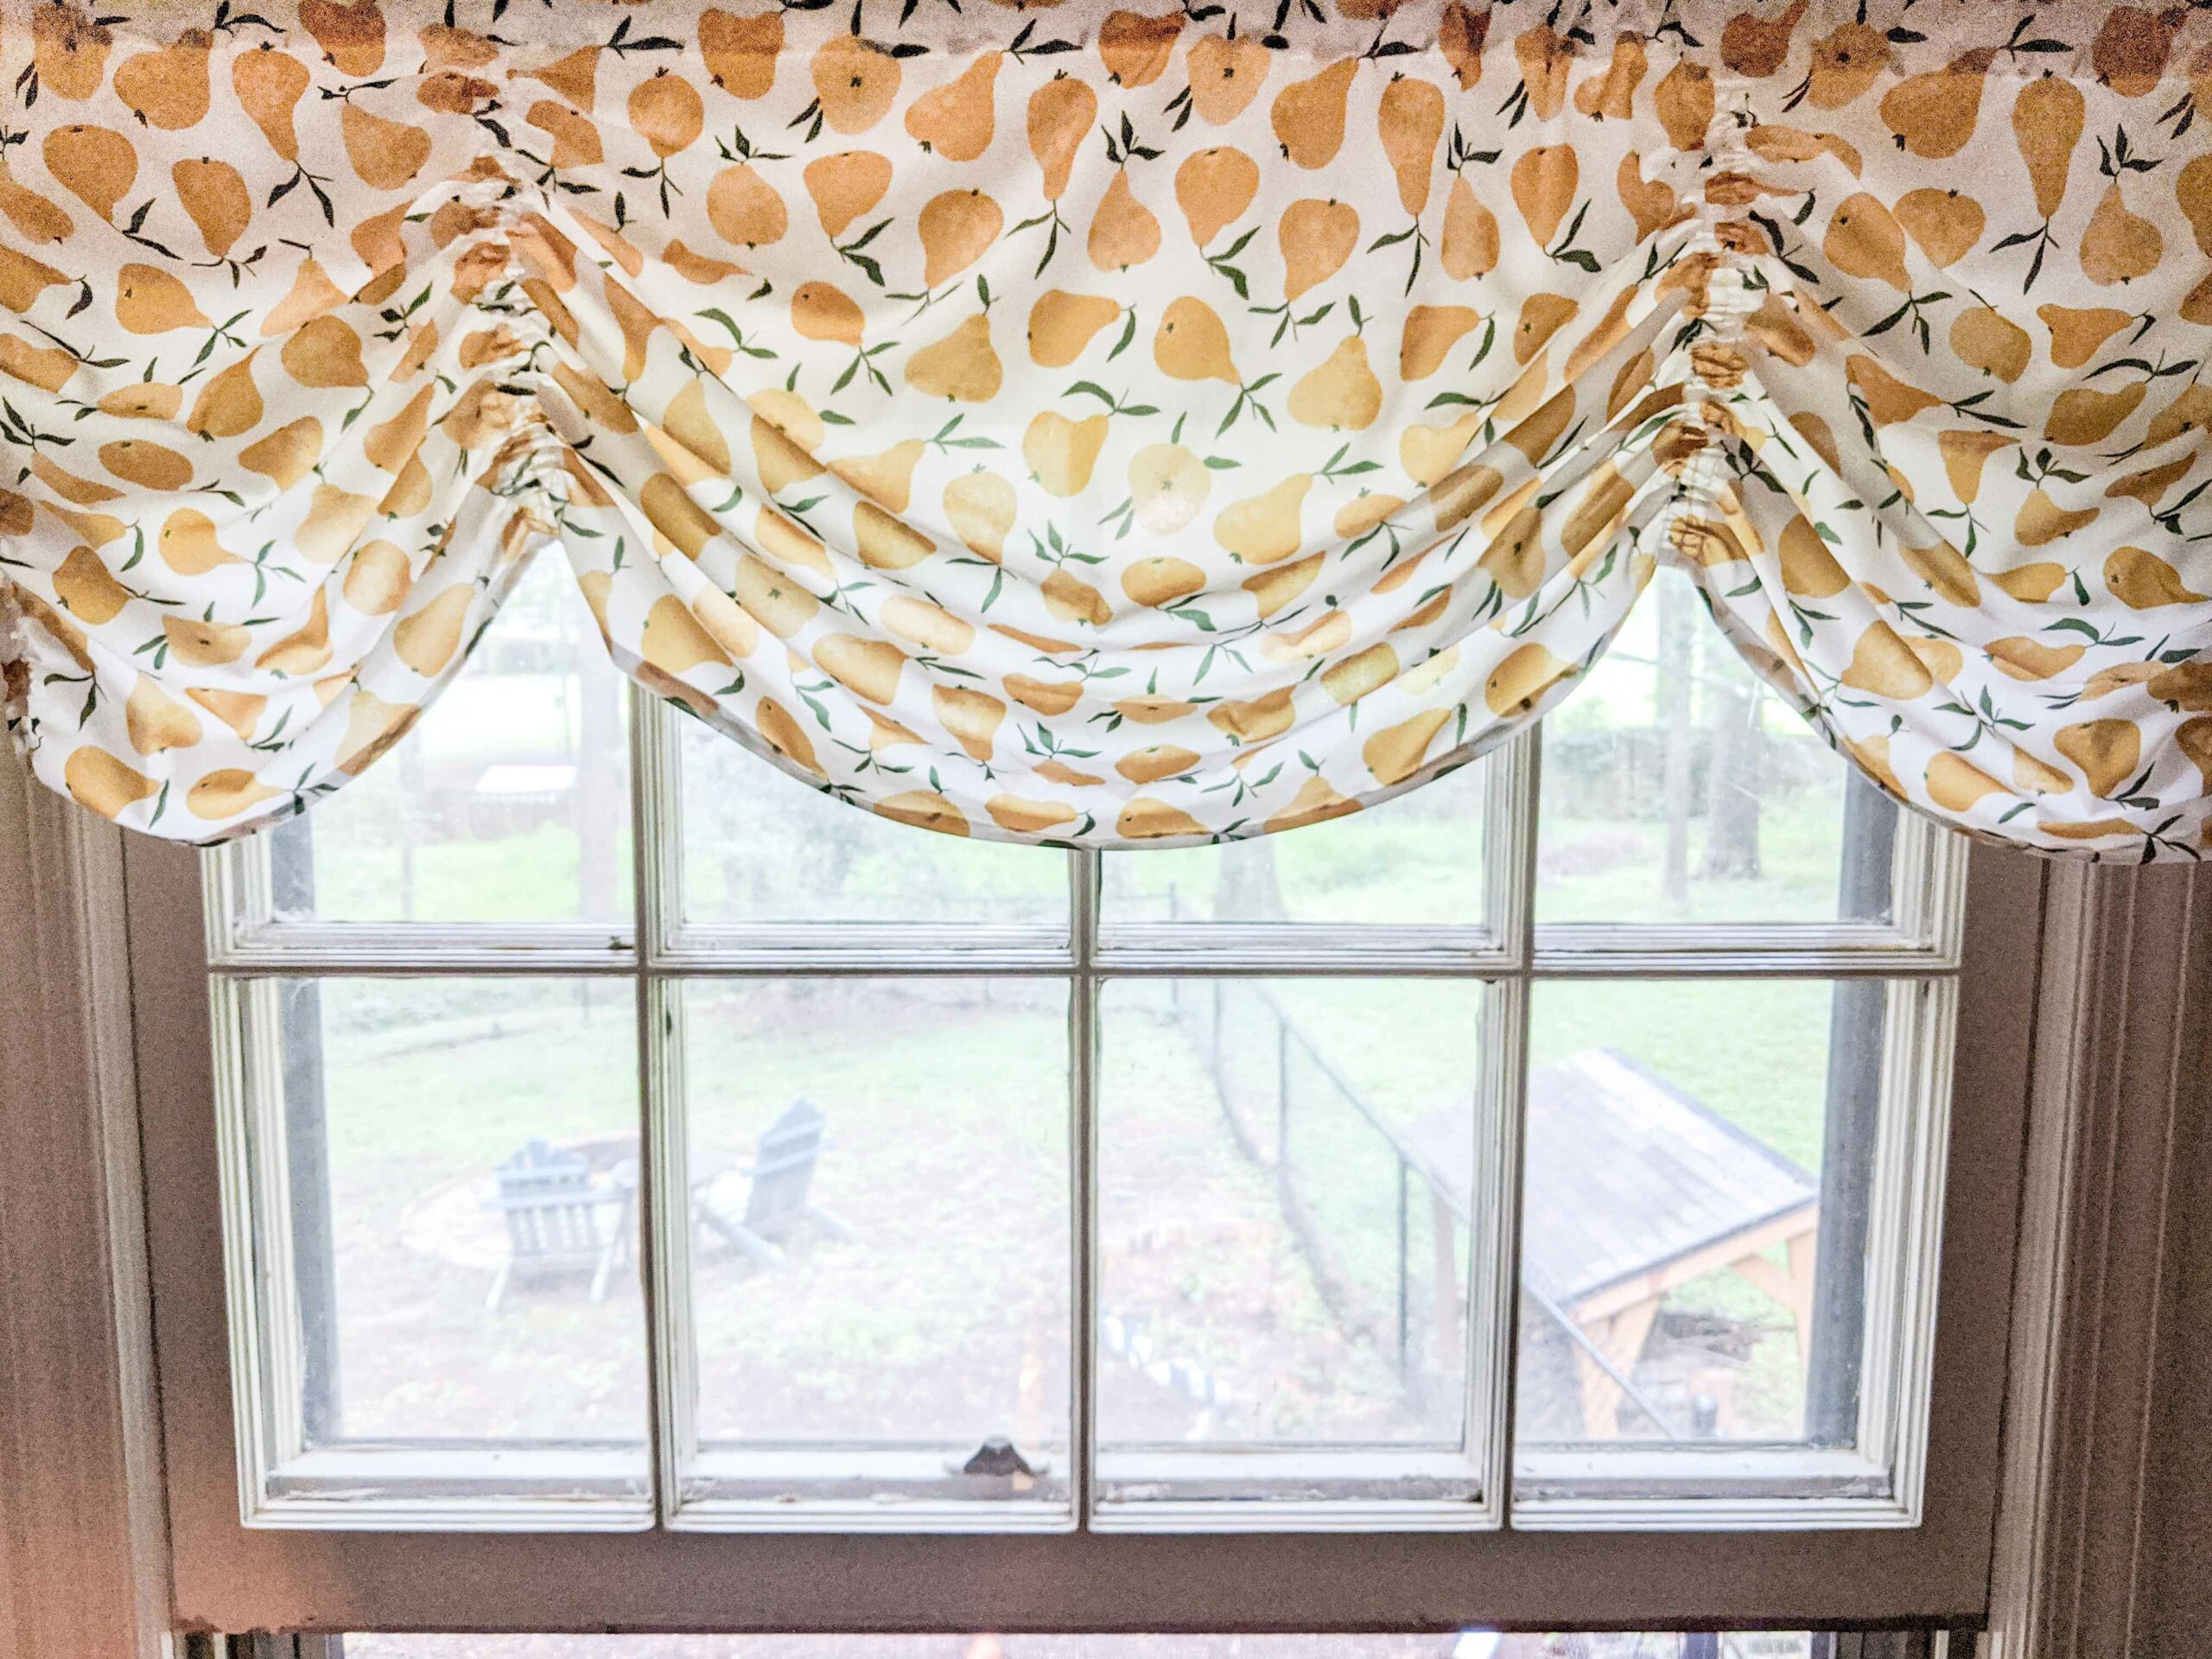 How to Make a Window Valance | Spoonflower Blog